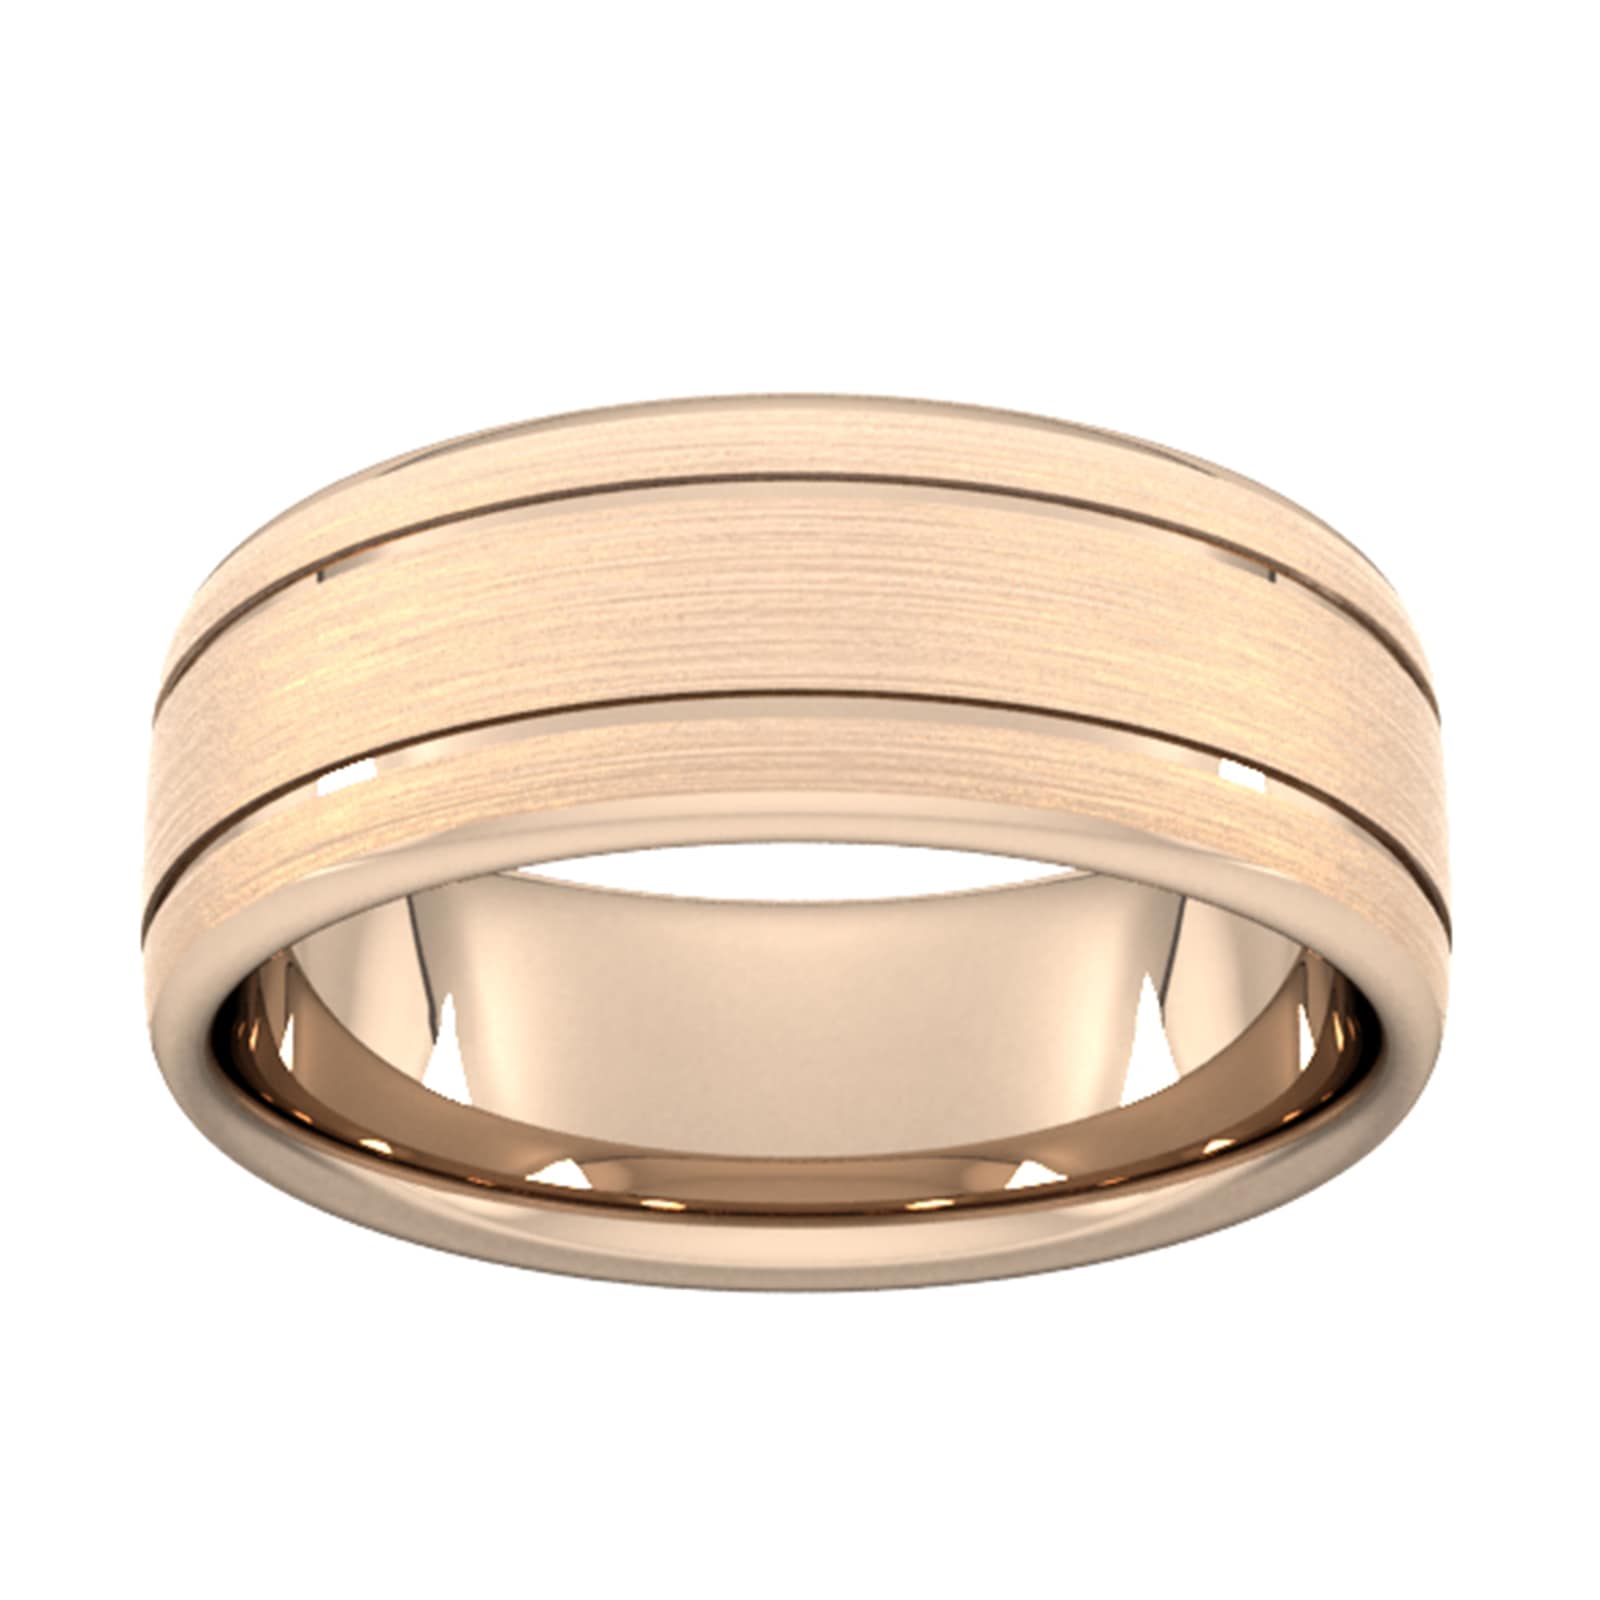 8mm Slight Court Standard Matt Finish With Double Grooves Wedding Ring In 9 Carat Rose Gold - Ring Size L